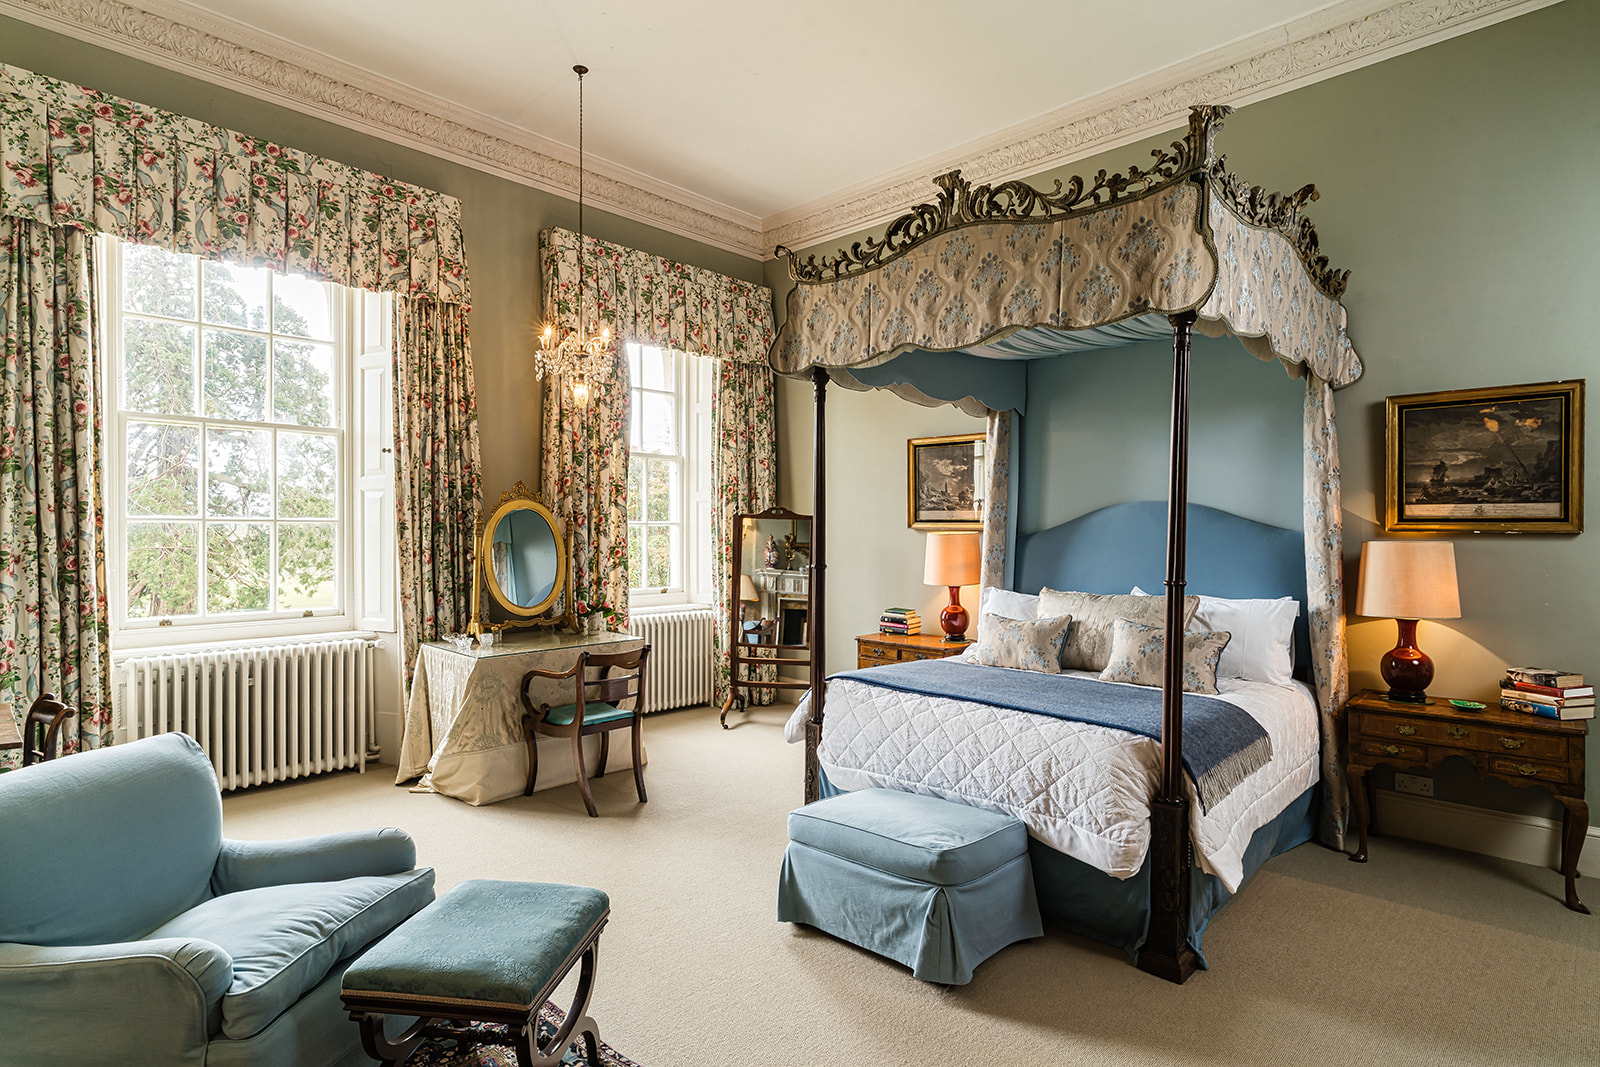 The Emma room offers luxury accommodation in Hampshire.